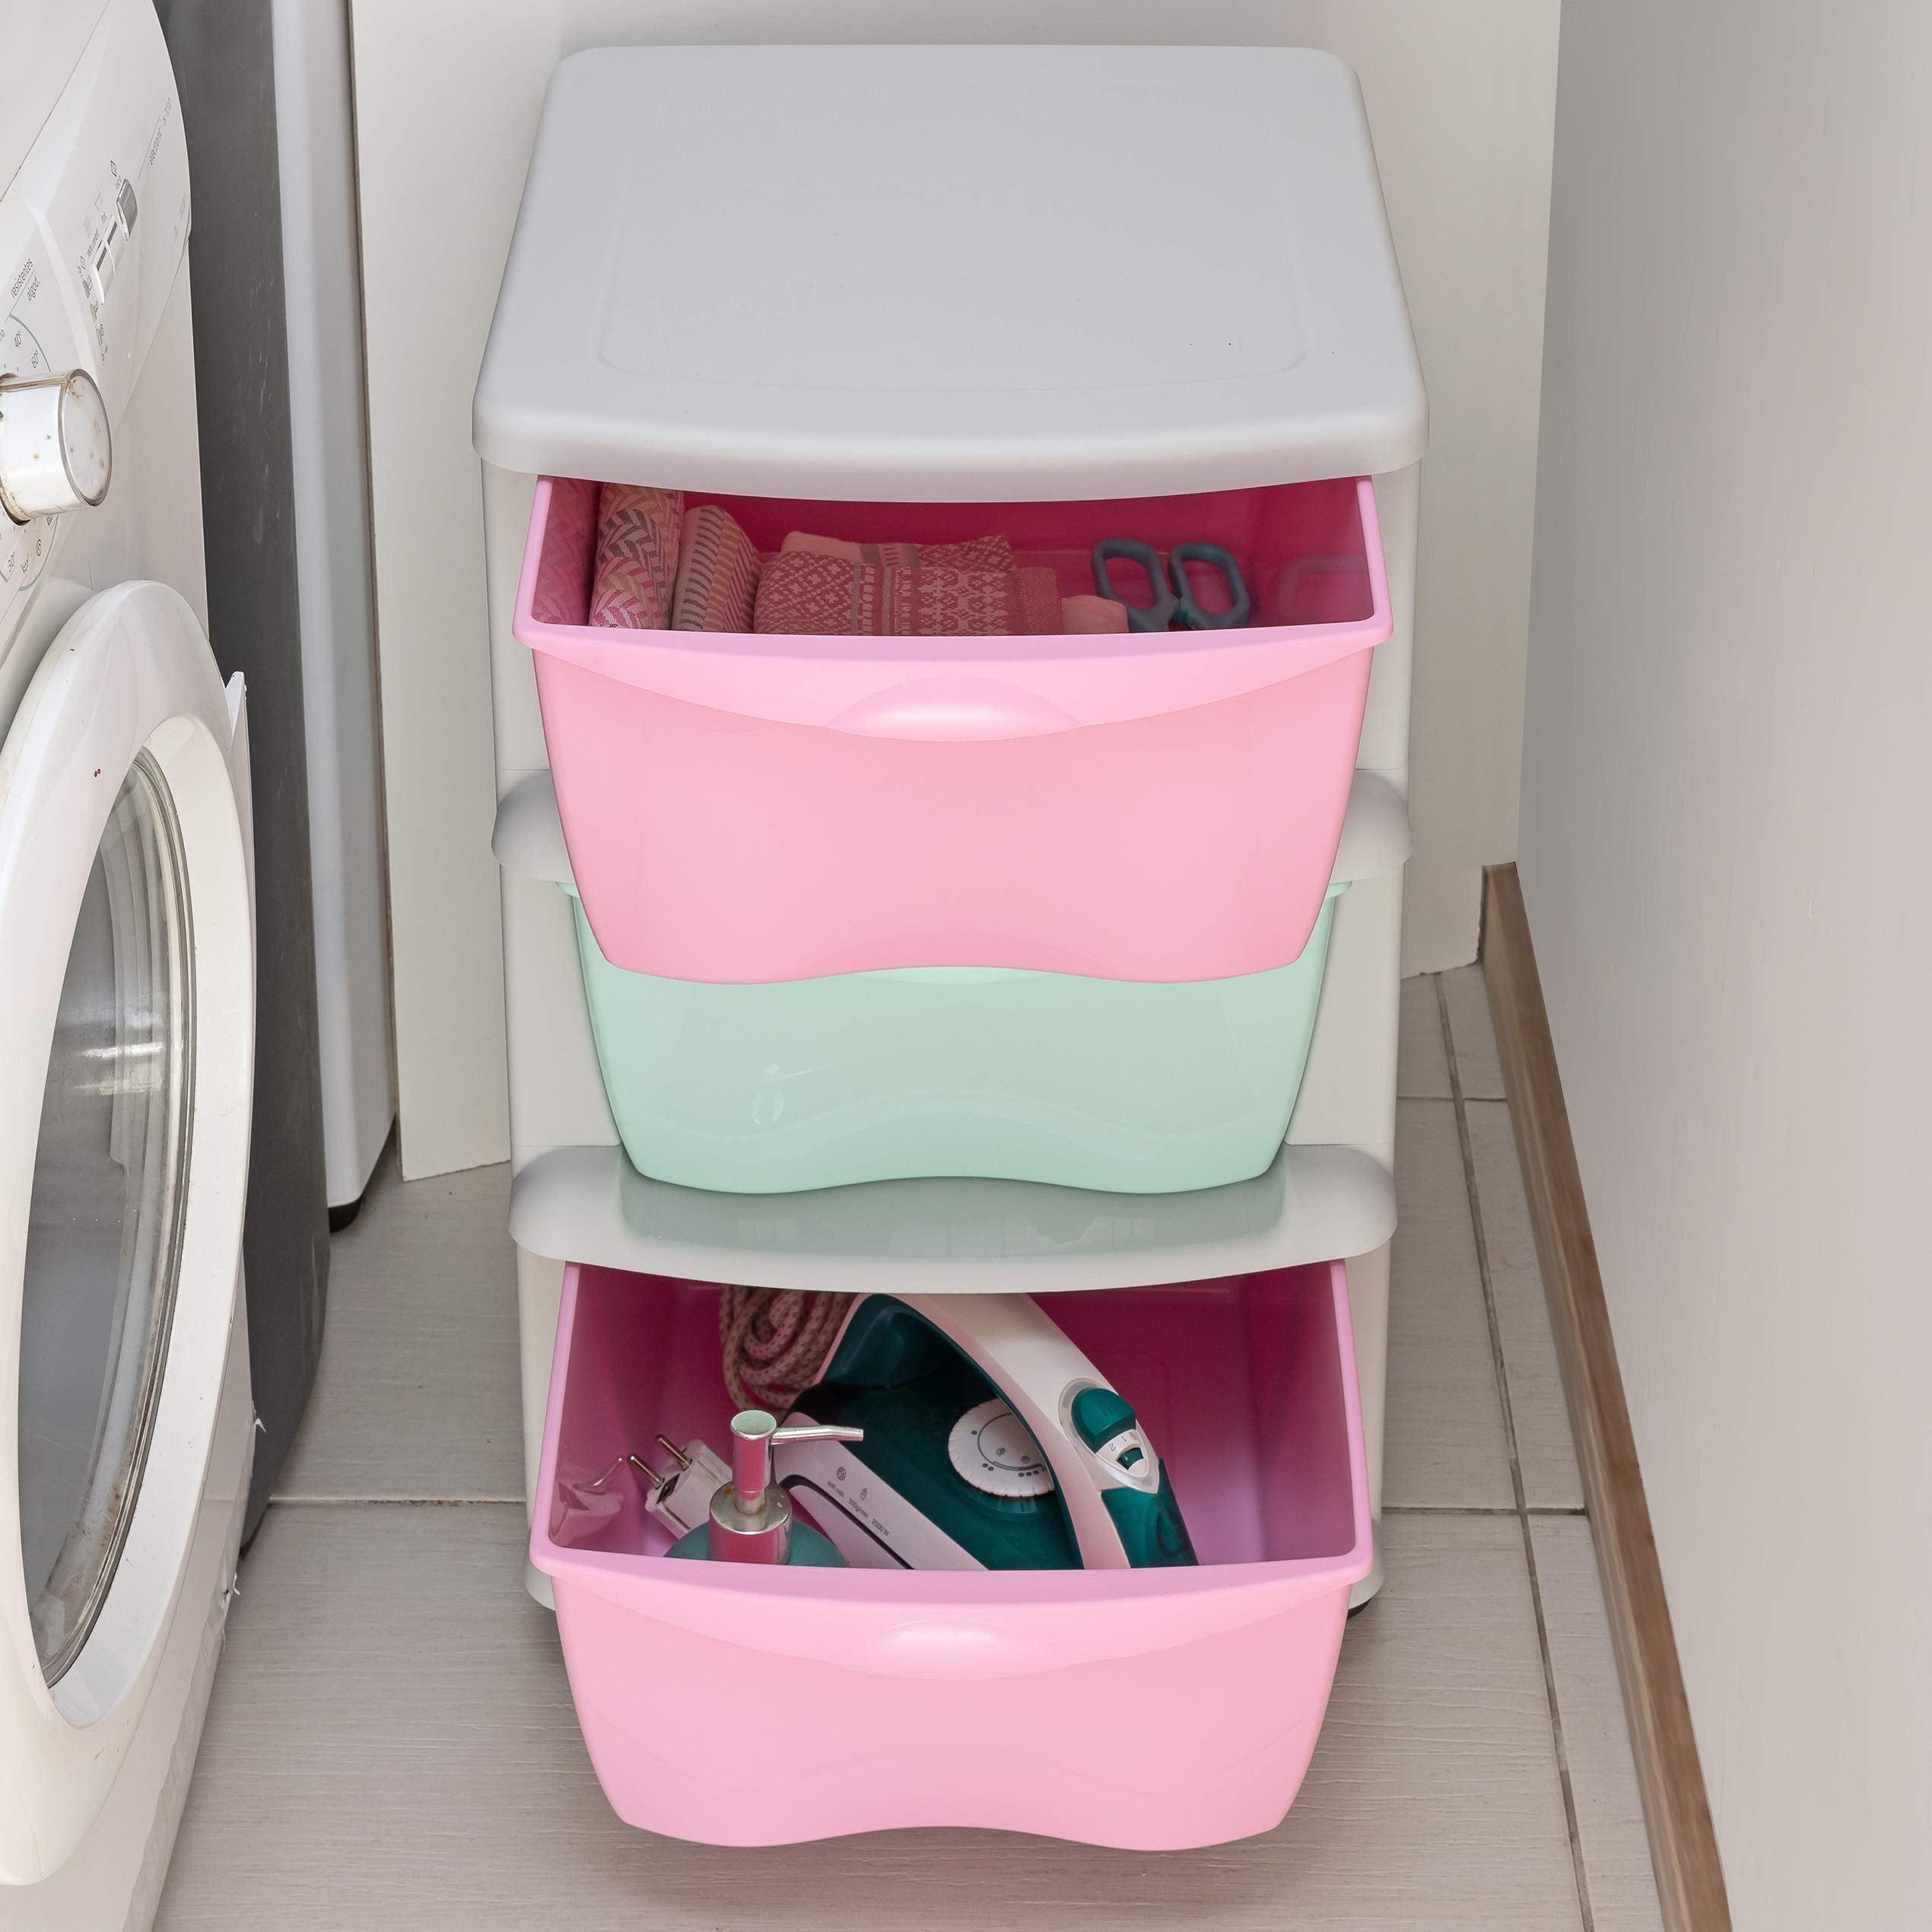 Maxi Nature Plastic Storage Drawers on Wheels - Sturdy Frame, Durable, Heavy Duty Organiser - 3 Tier Large Storage Unit for Kids Bedroom, Bathroom, Office - Made in Europe - Pink/Blue 4